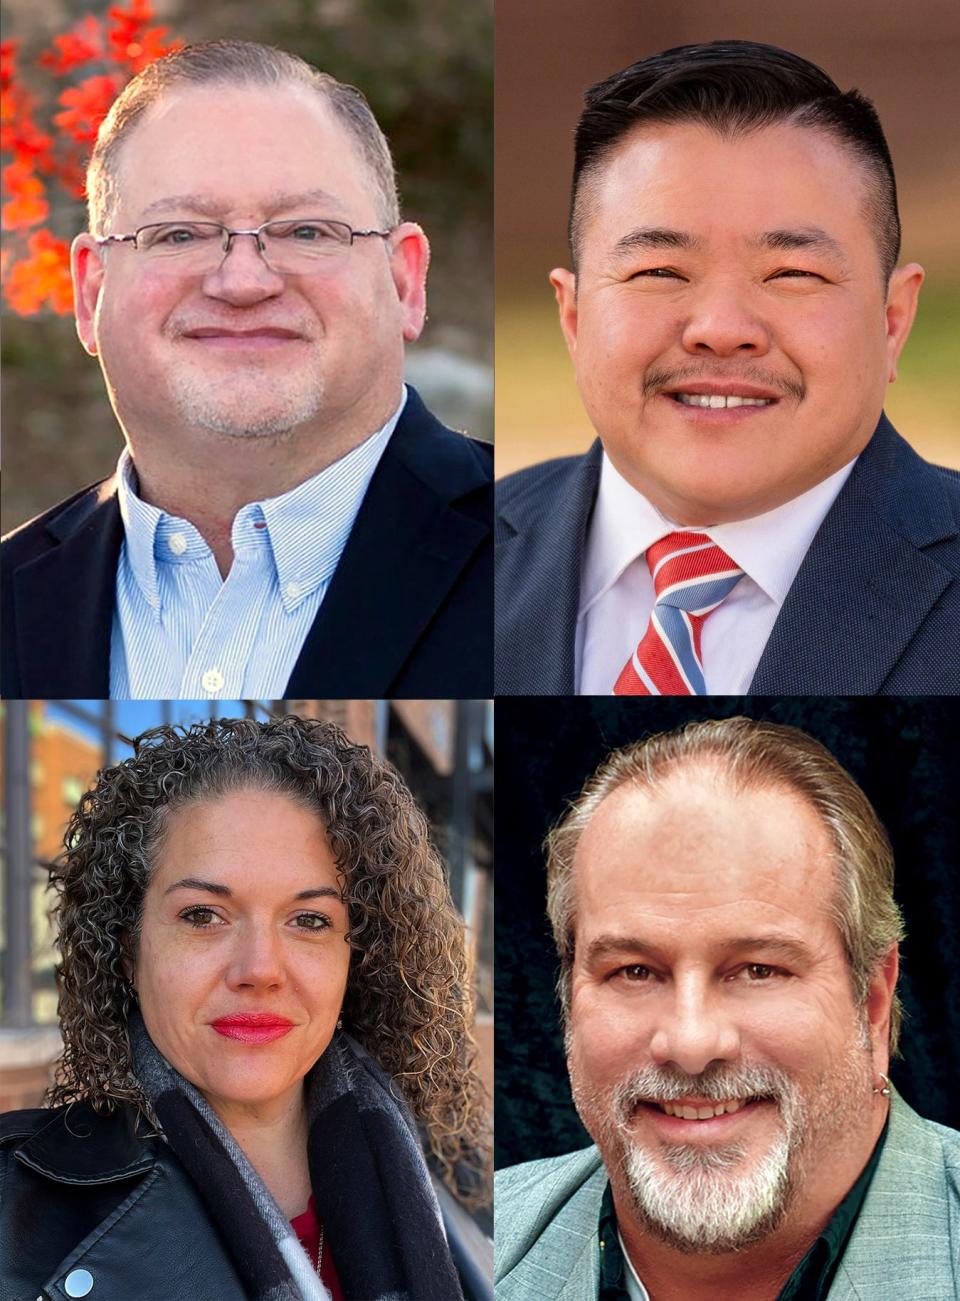 Ward 5 Oklahoma City Council candidates, top from left, Jeff Owen and Thuan Nguyen, bottom from left, Audra Beasley and Matt Hinkle. 